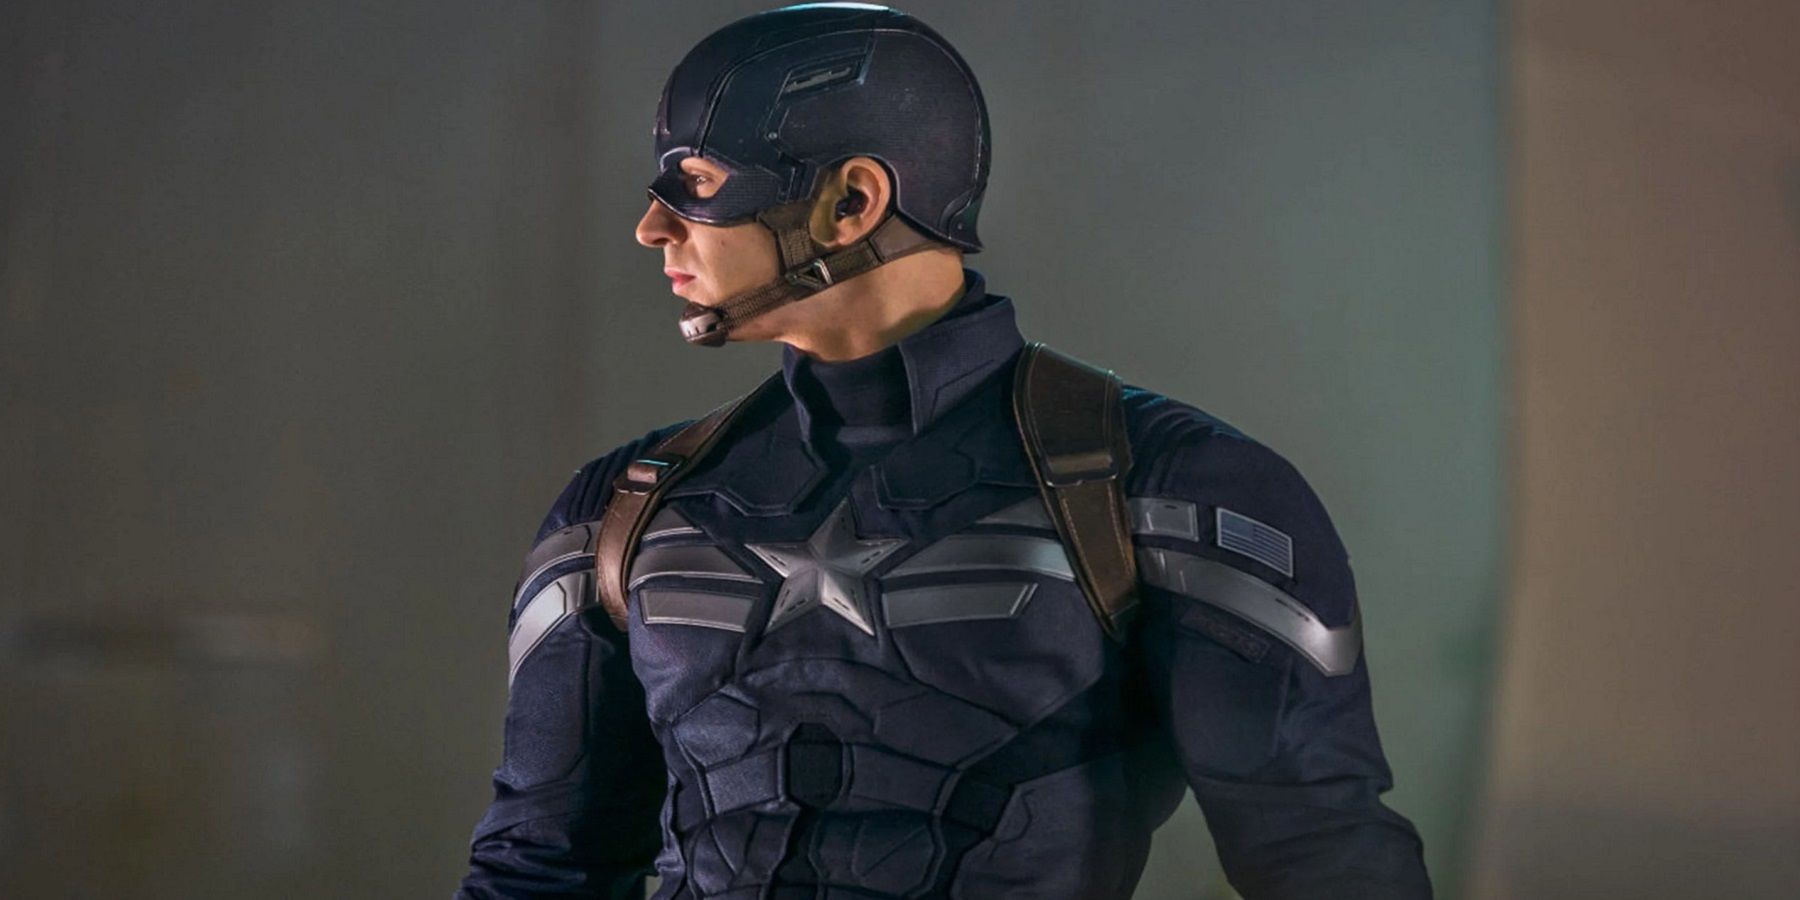 The stealth suit from Captain America: The Winter Soldier makes its in-game debut in Marvel's Avengers.